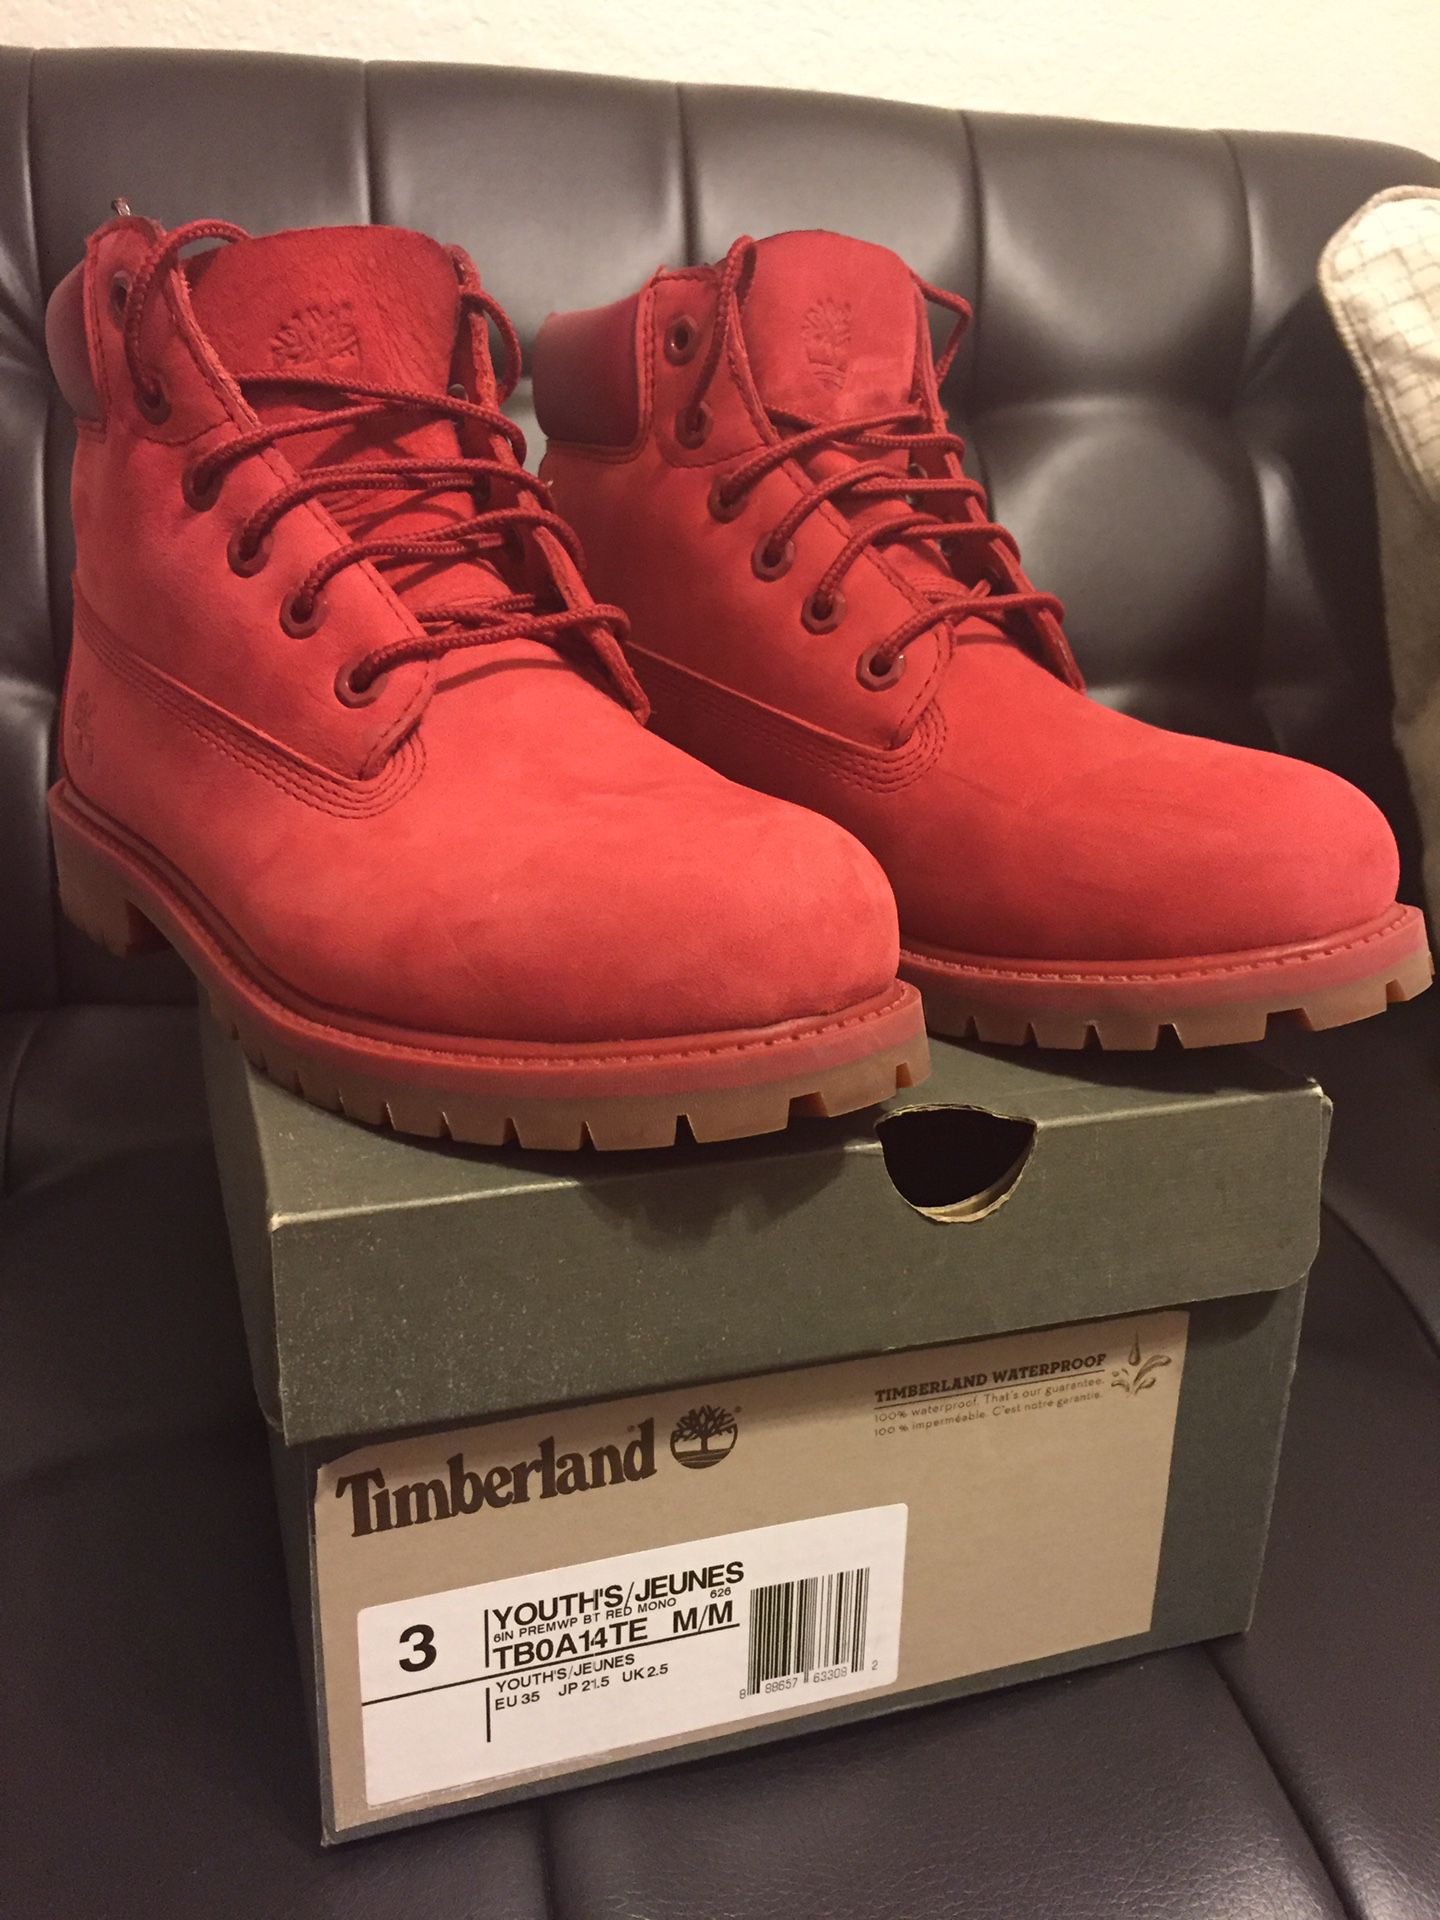 Timberland Boots, size 3 youth